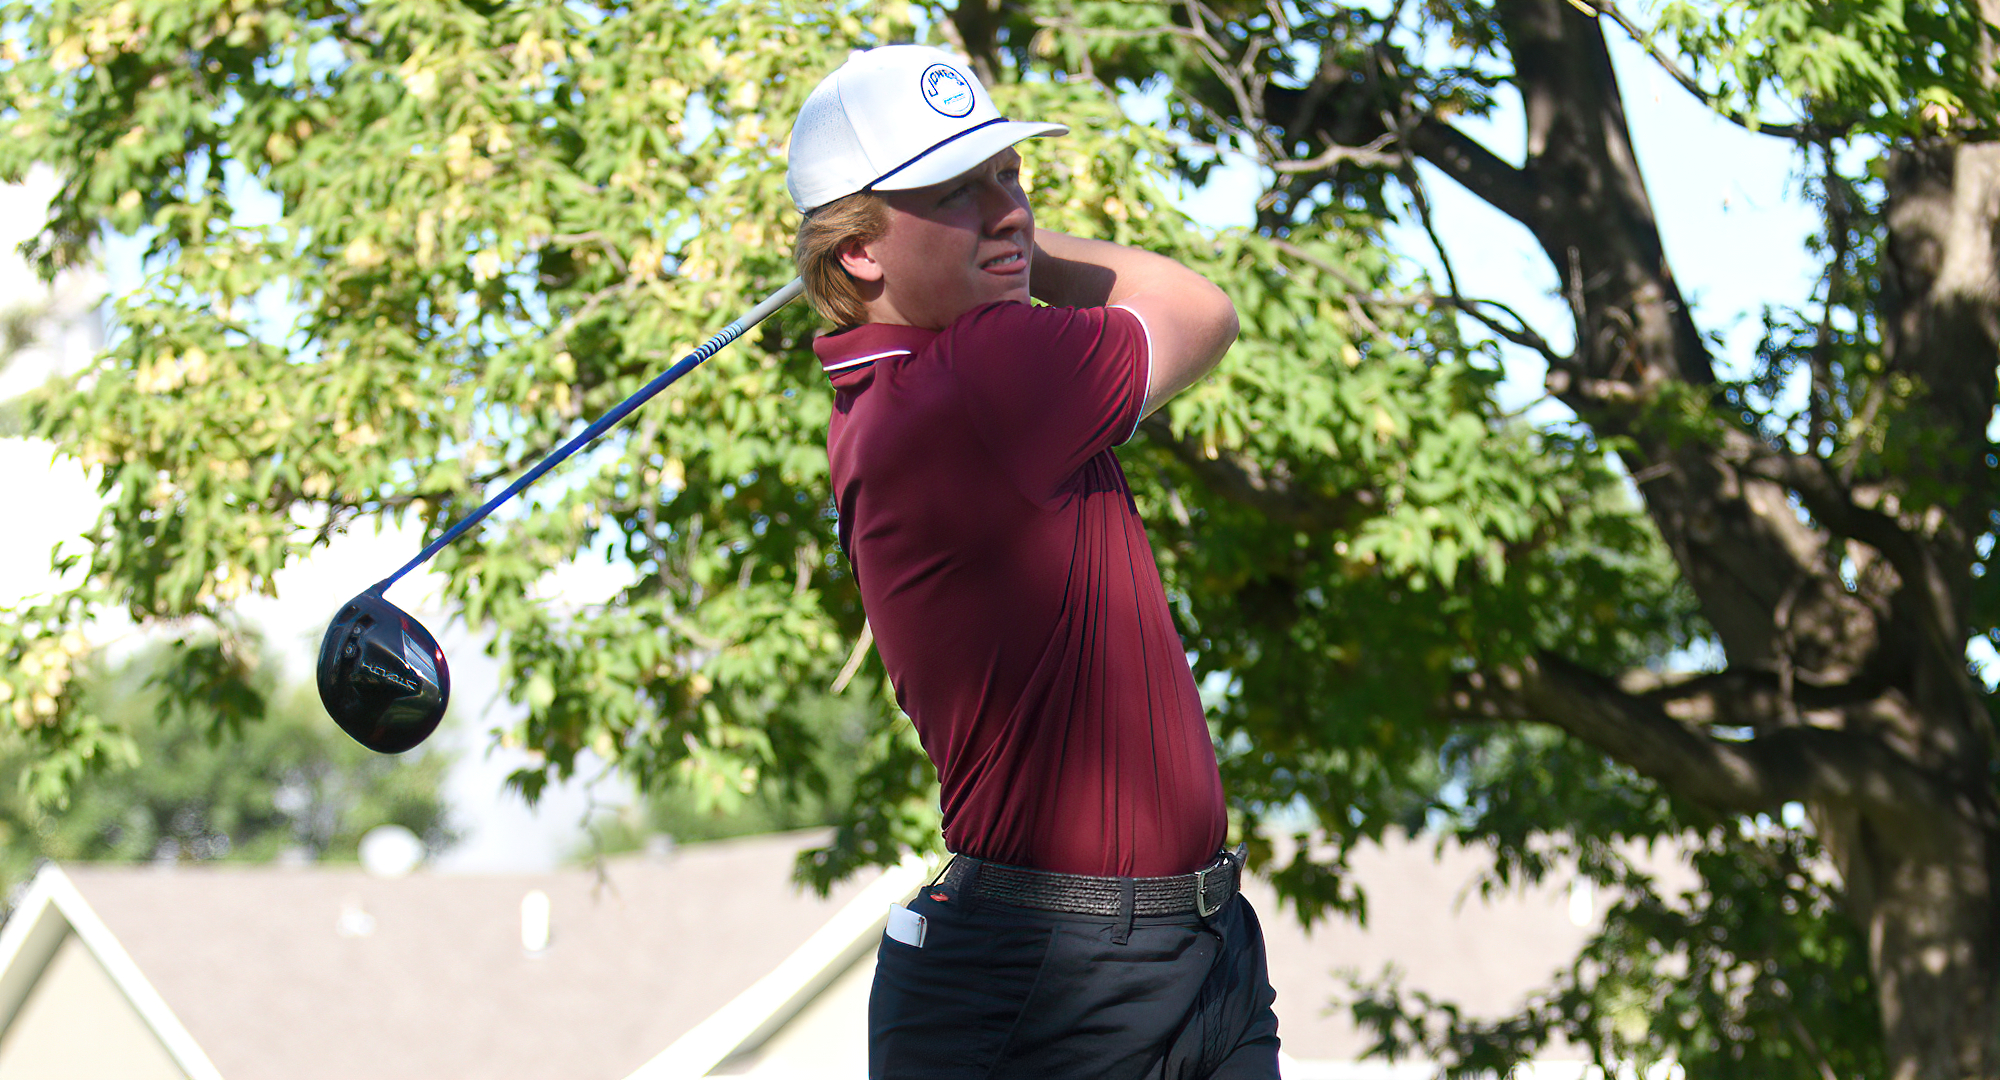 Landon Olson led a trio of freshmen that paced the Cobbers at the Bemidji State Invite. He fired a 2-day total of 145 and finished in 13th place.